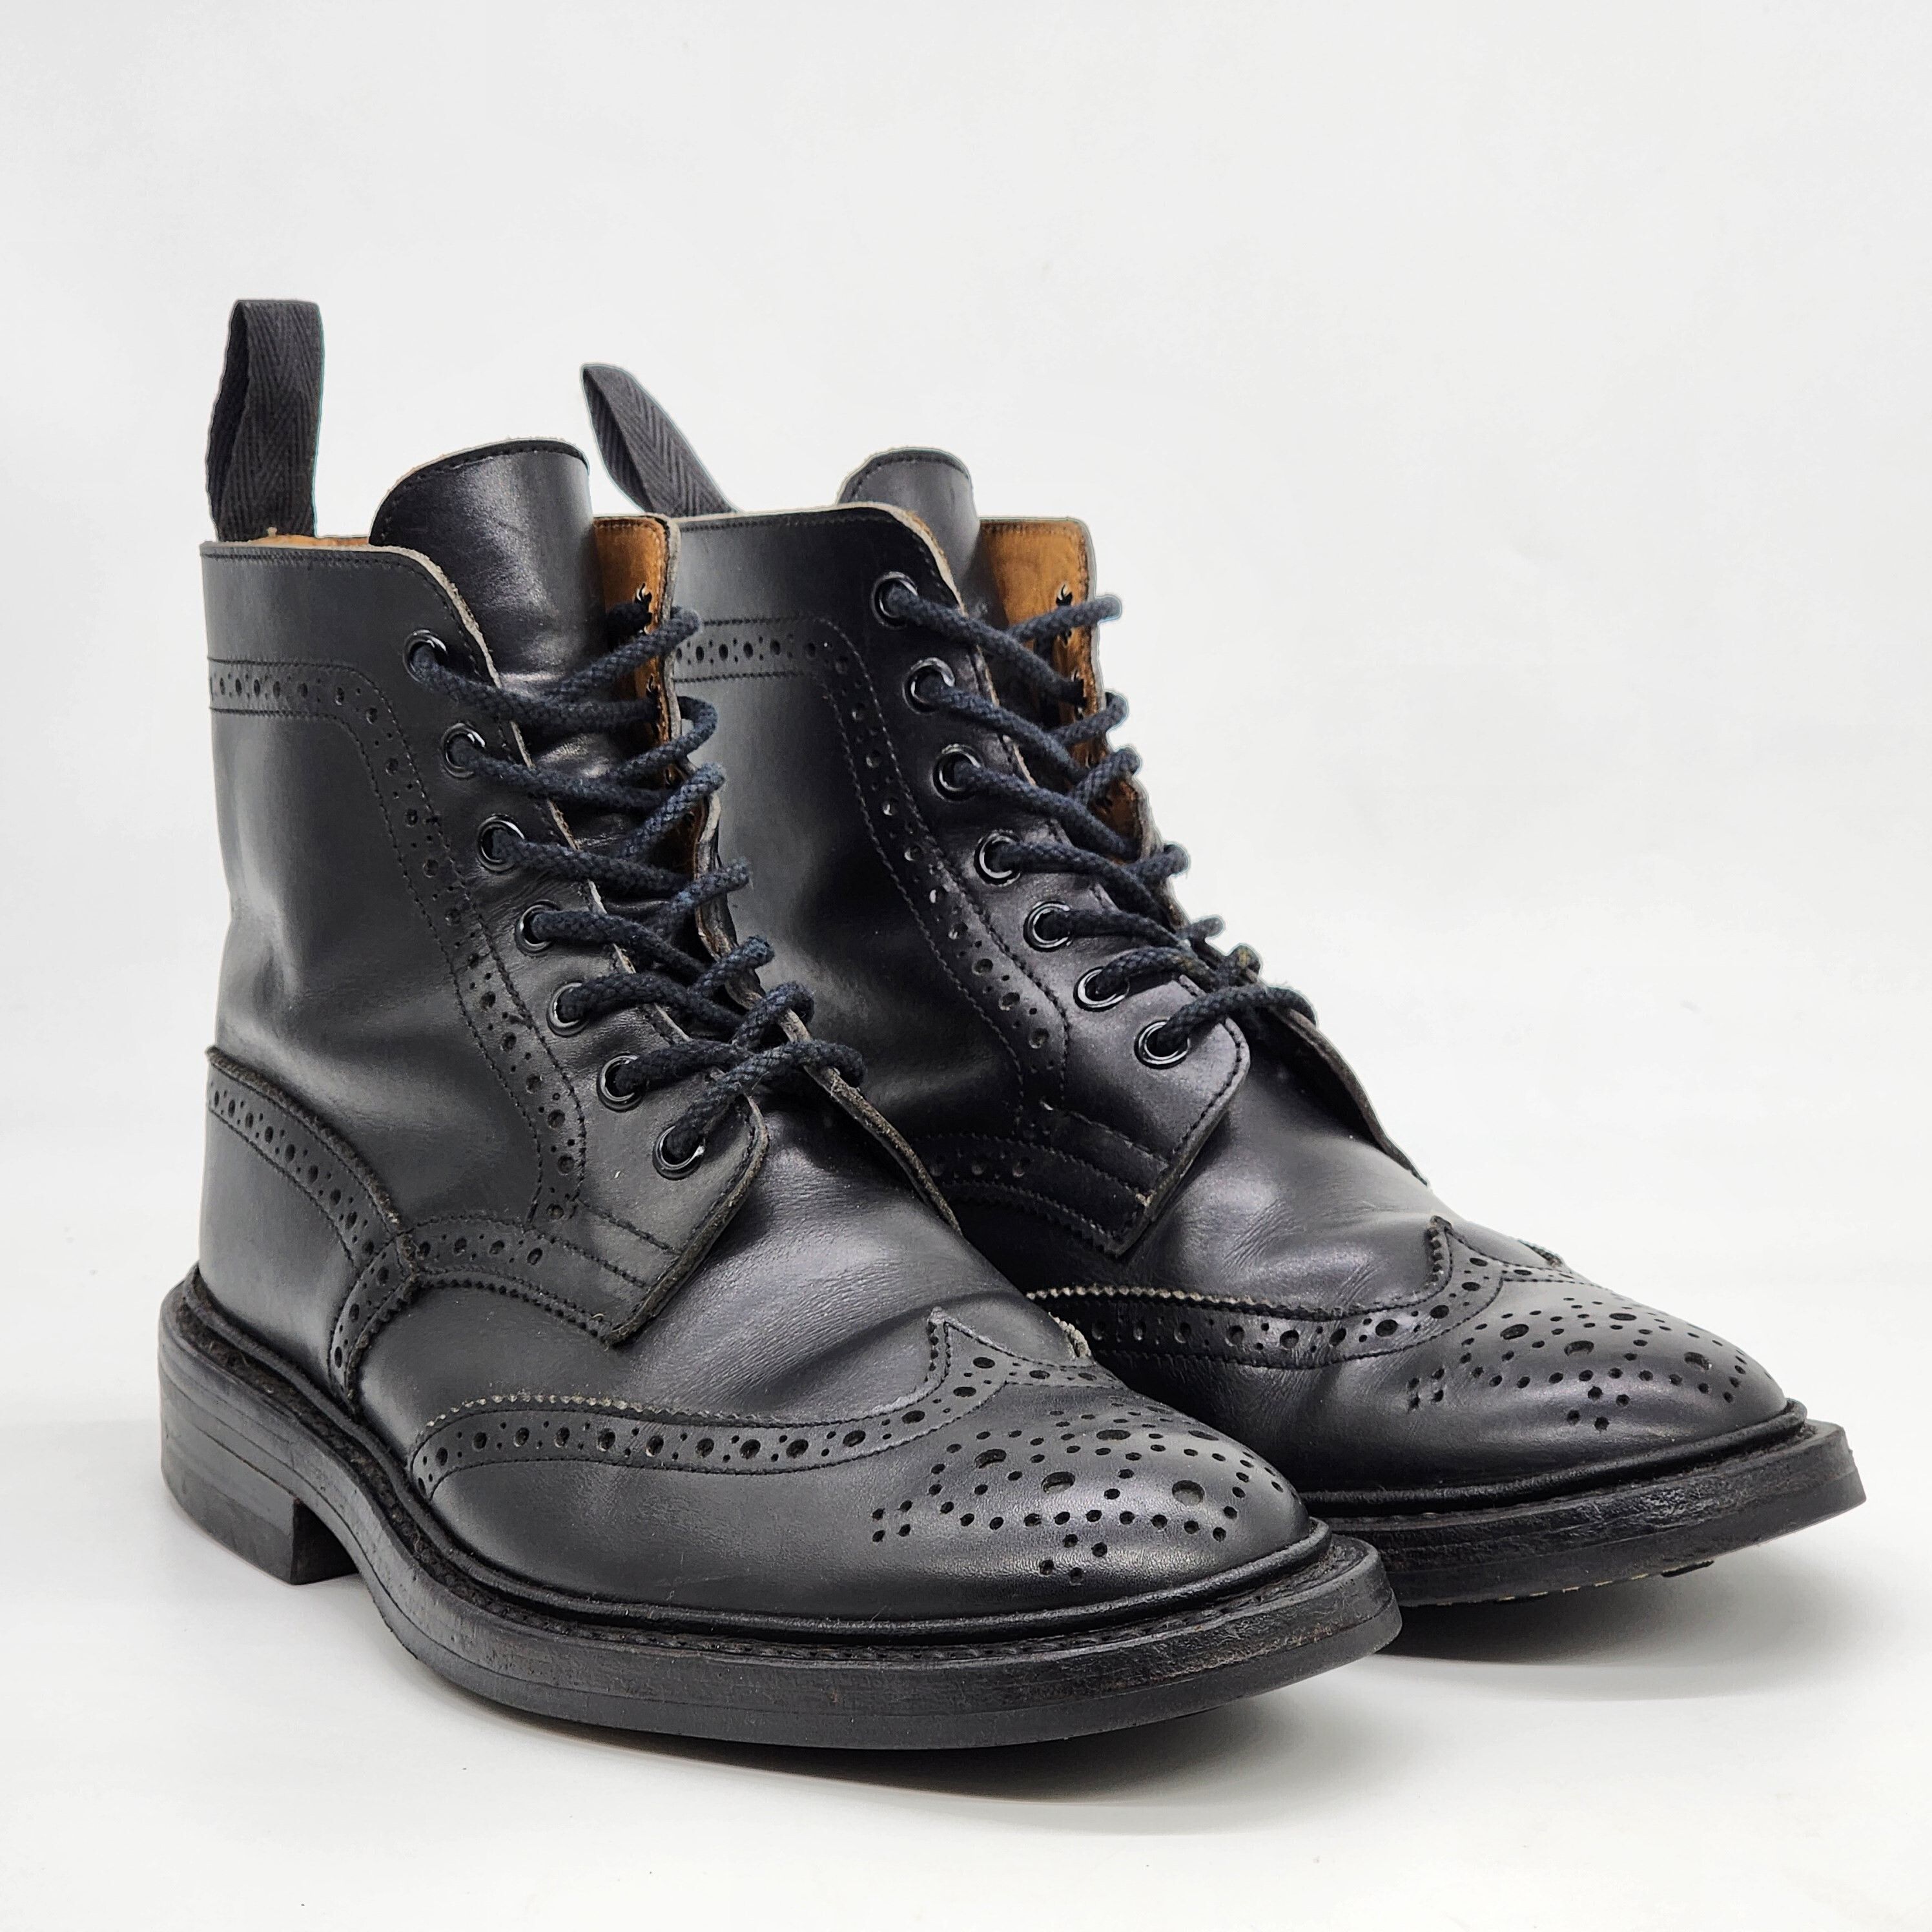 Trickers - Stow Boots - Black - 2